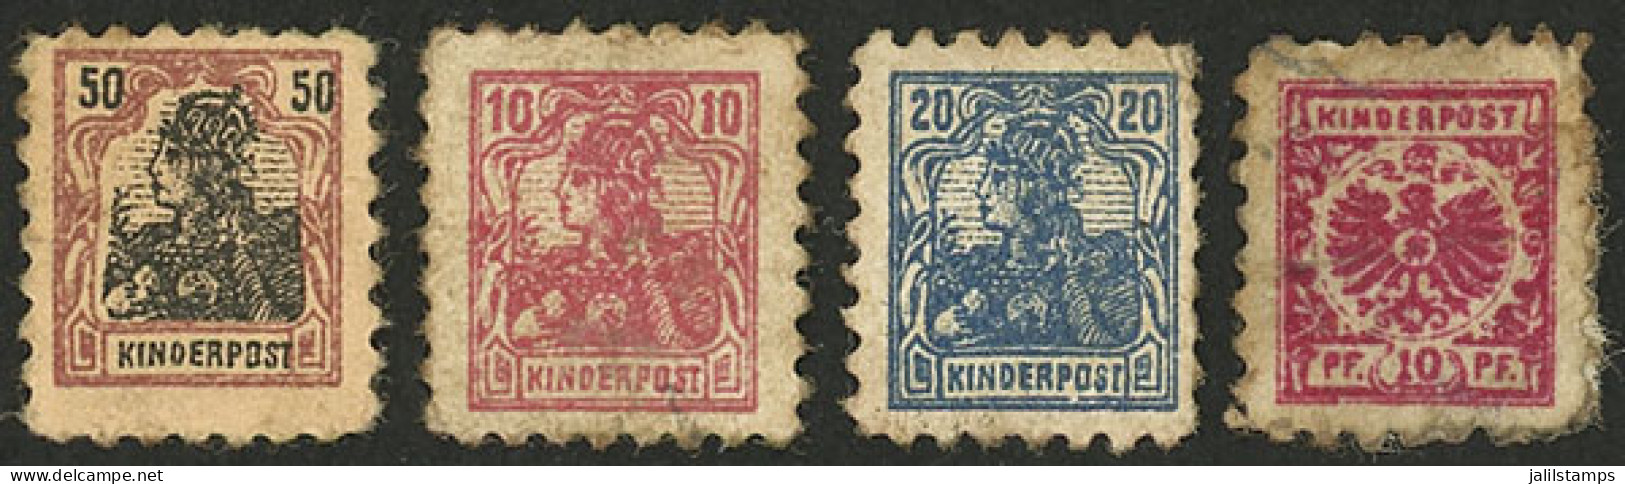 GERMANY: KINDERPOST: 4 Very Small Stamps, Minor Defects, Very Interesting! - Erinnophilie